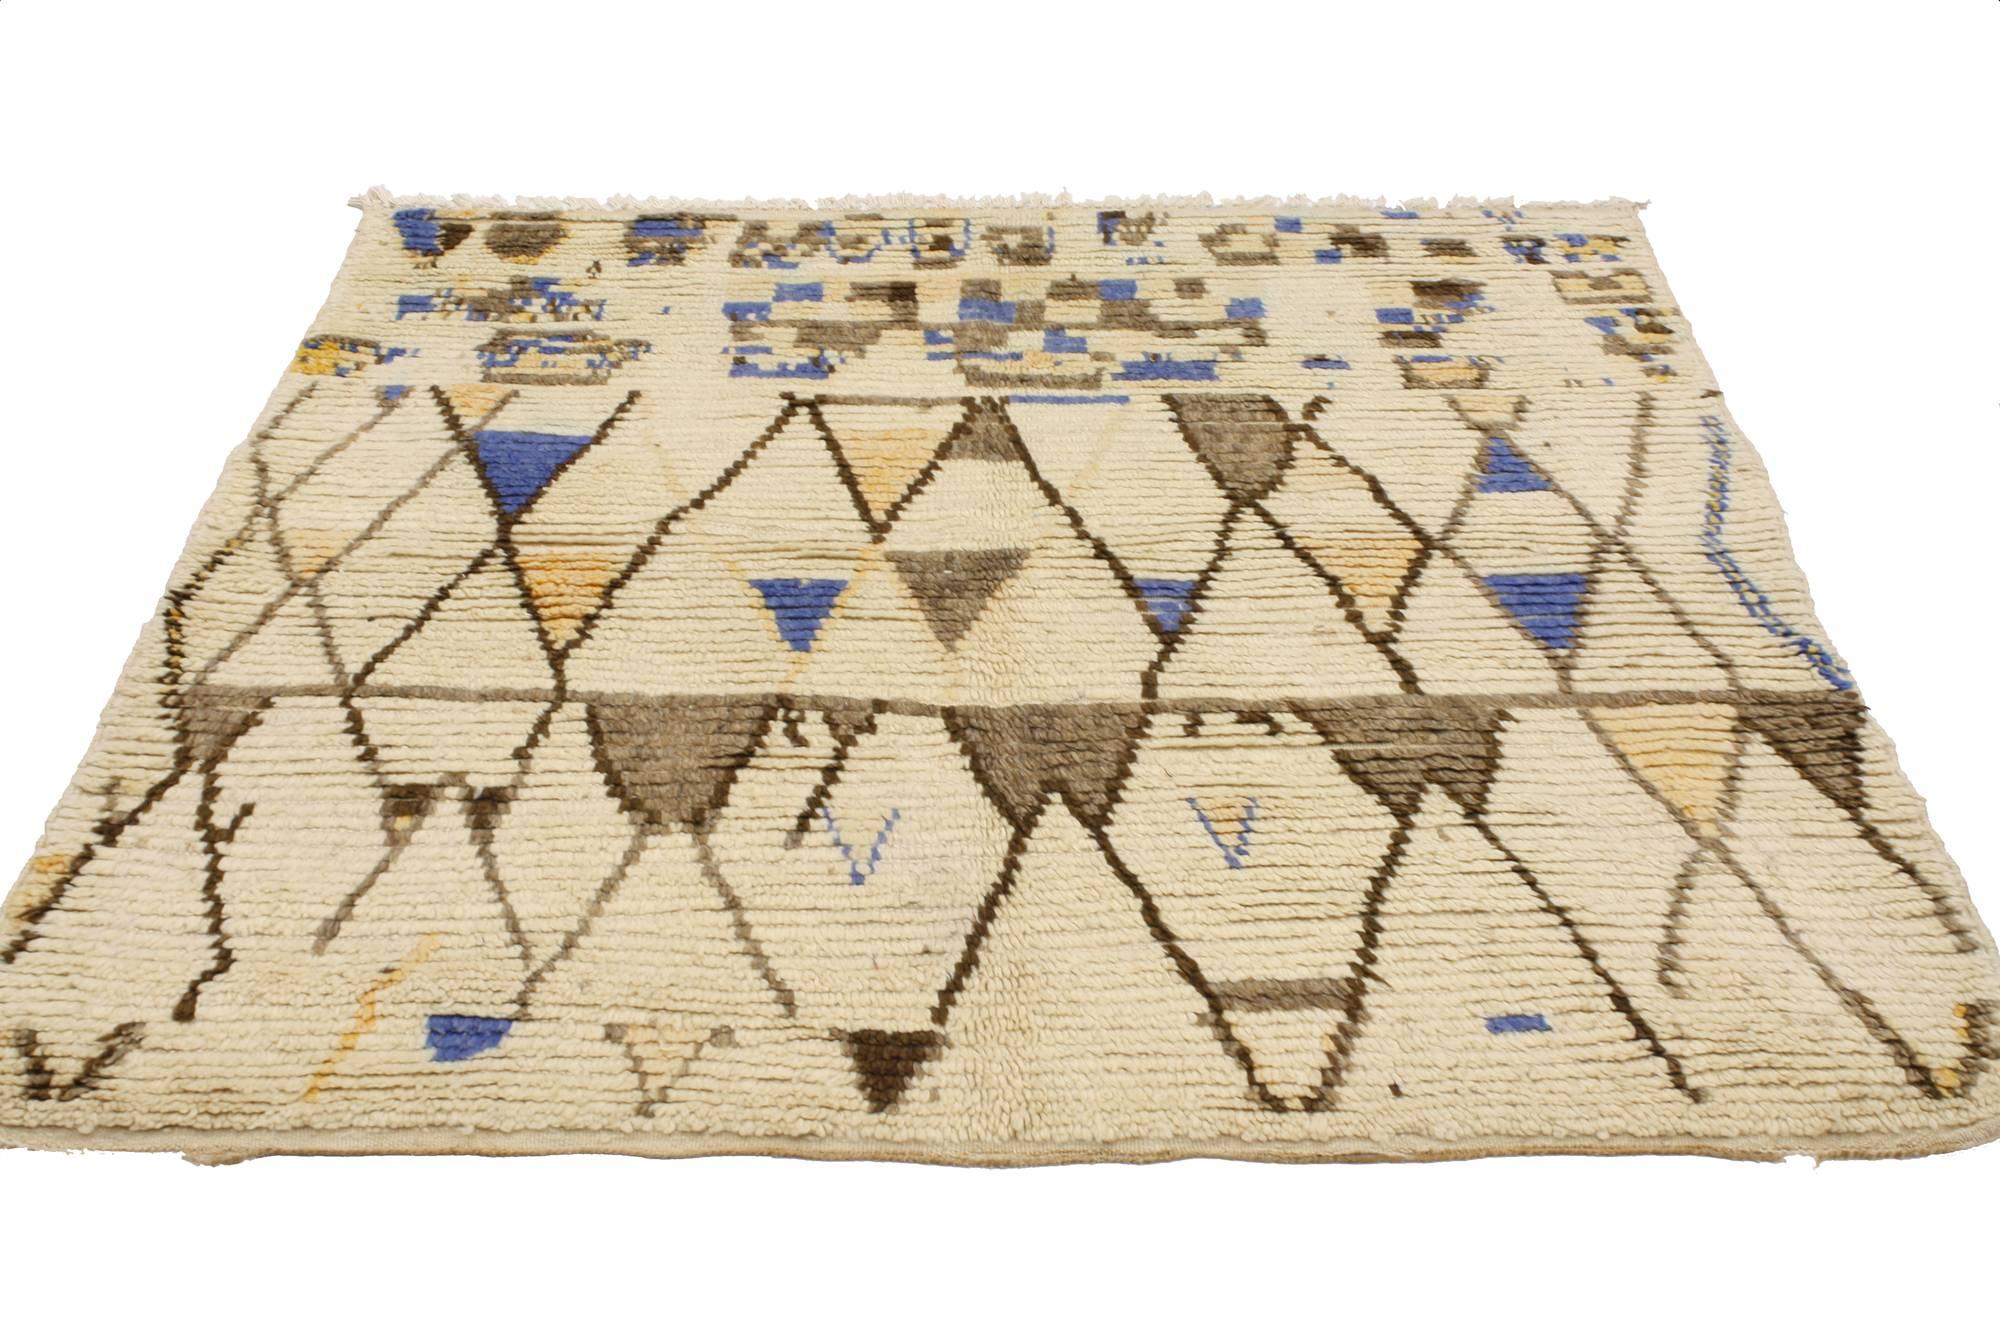 20512, vintage Berber Moroccan Azilal rug. The warm brown, mocha, coffee, light yellow, sand, beige and the cool blue colors conjure the tribal feeling of Moroccan spirit in this Vintage Berber Moroccan Azilal rug. The different colored lines create